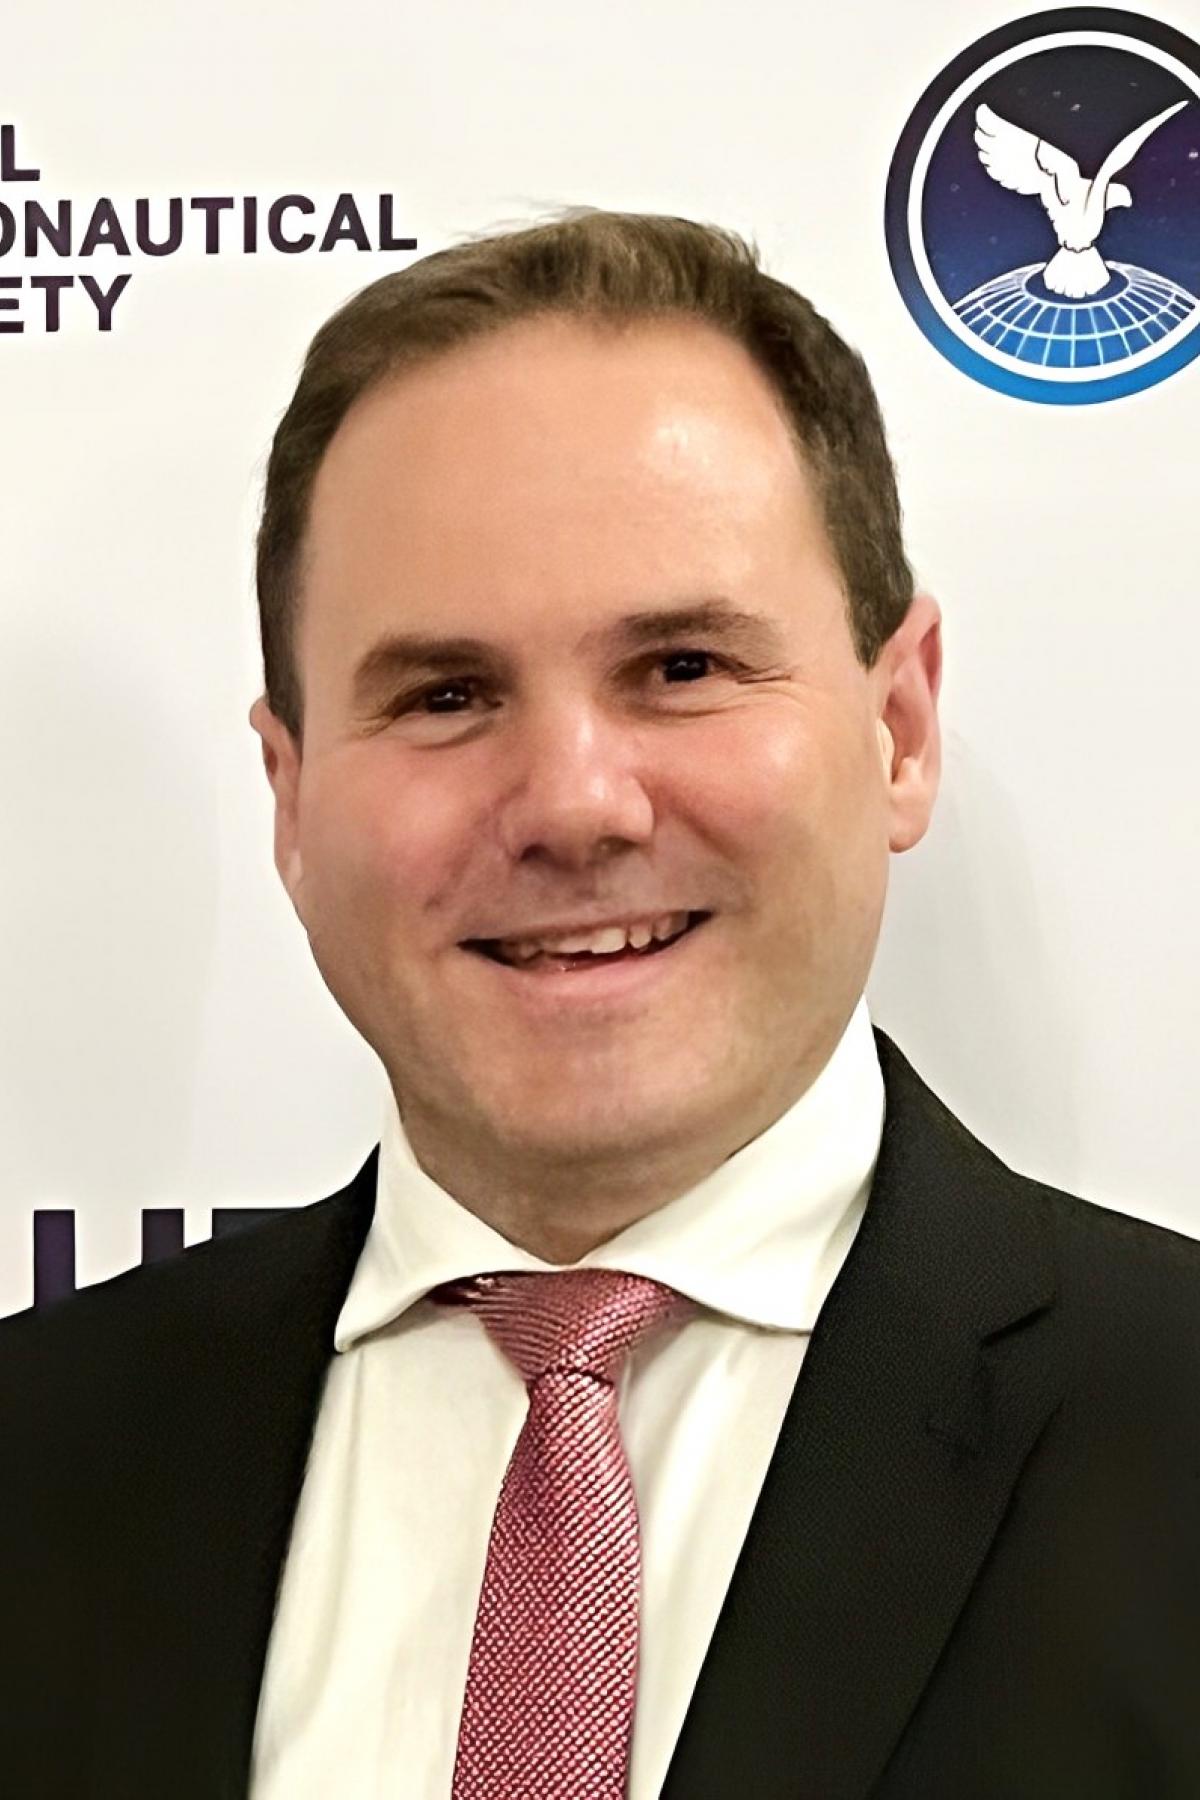 A portrait of Tom Smith in a suit, smiling